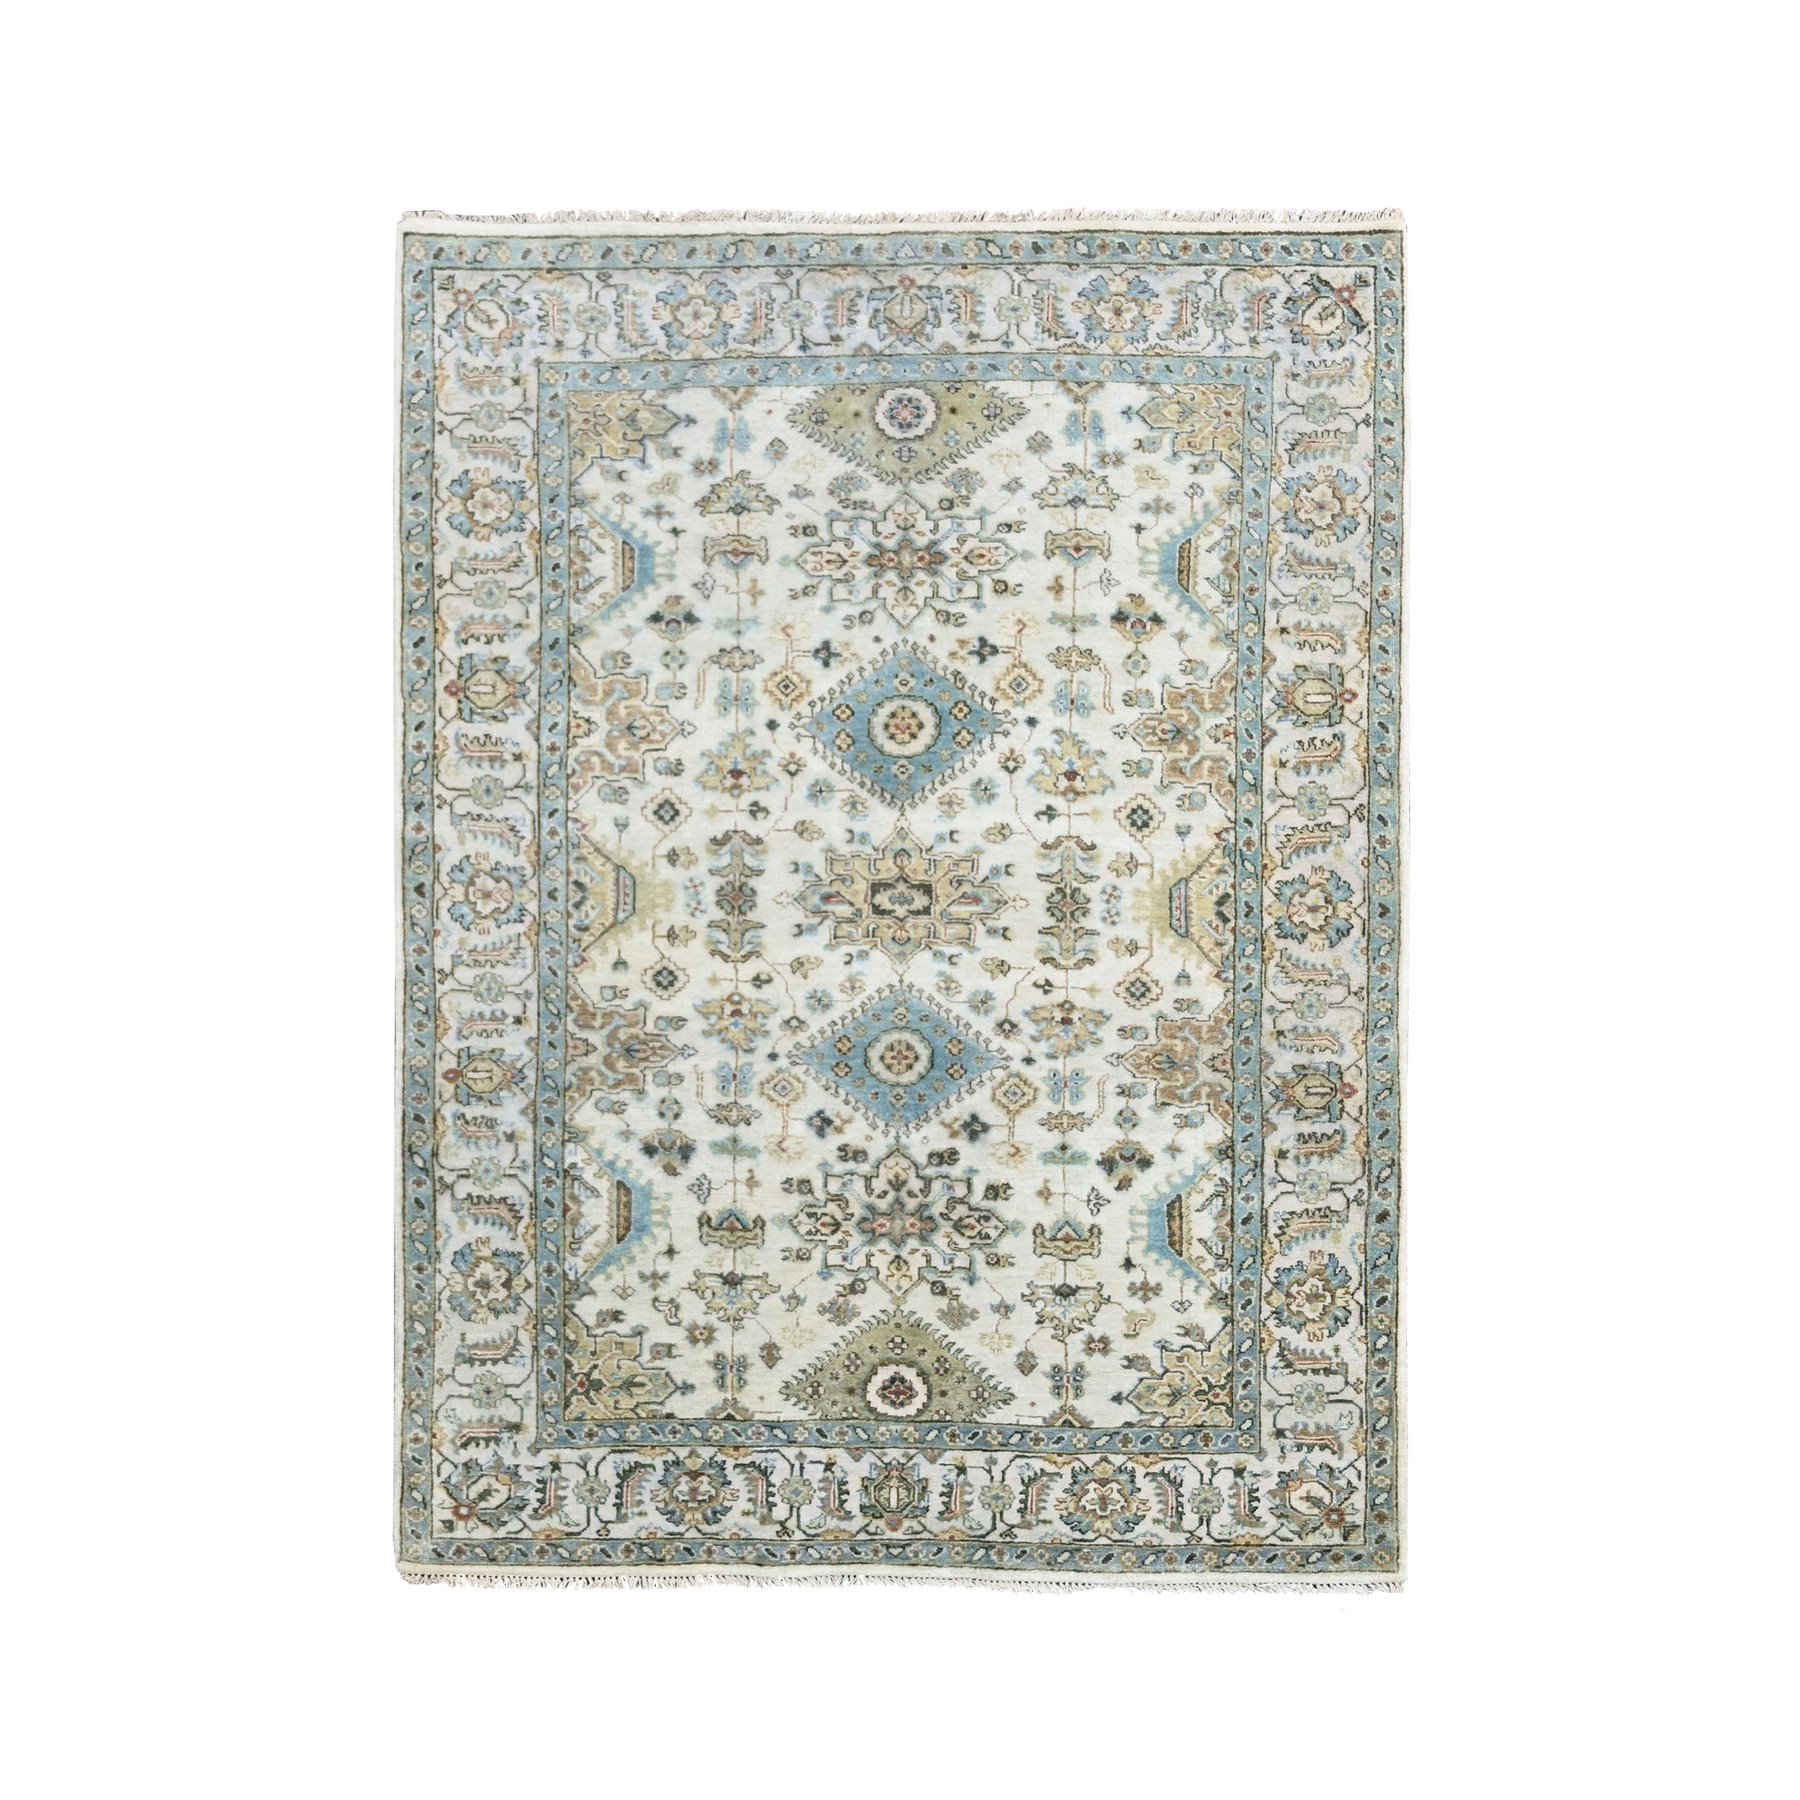  Wool Hand-Knotted Area Rug 5'3